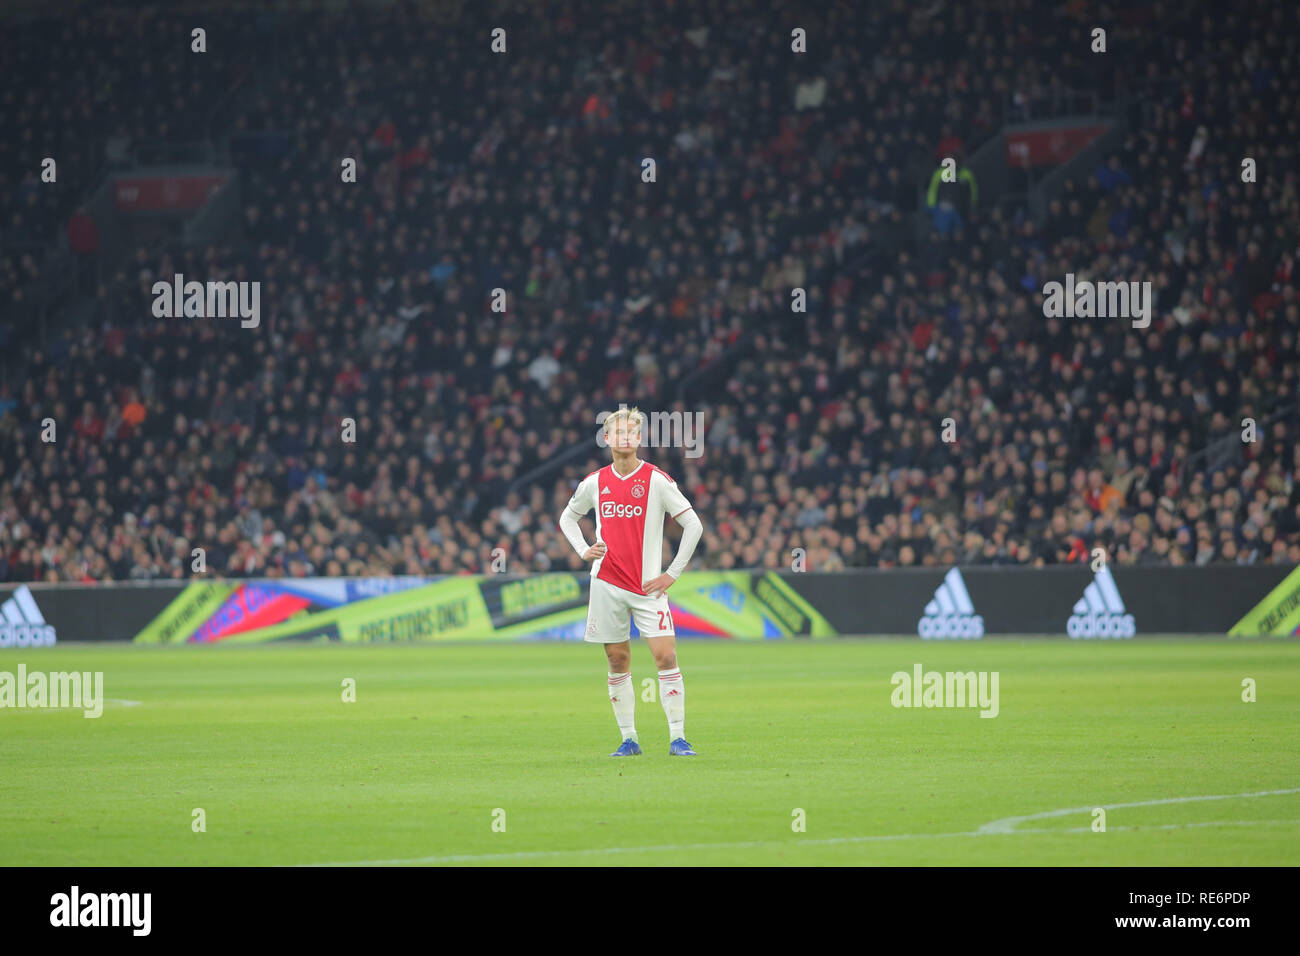 Amsterdam, Netherlands. 20th January 2019. Ajax midfielder Frankie de Jong stands in the fieldduring the game against Heerenveen for a match in the Dutch first division. Amsterdam, Netherlands, January 20, 2019. Credit: Federico Guerra Maranesi/Alamy Live News Stock Photo